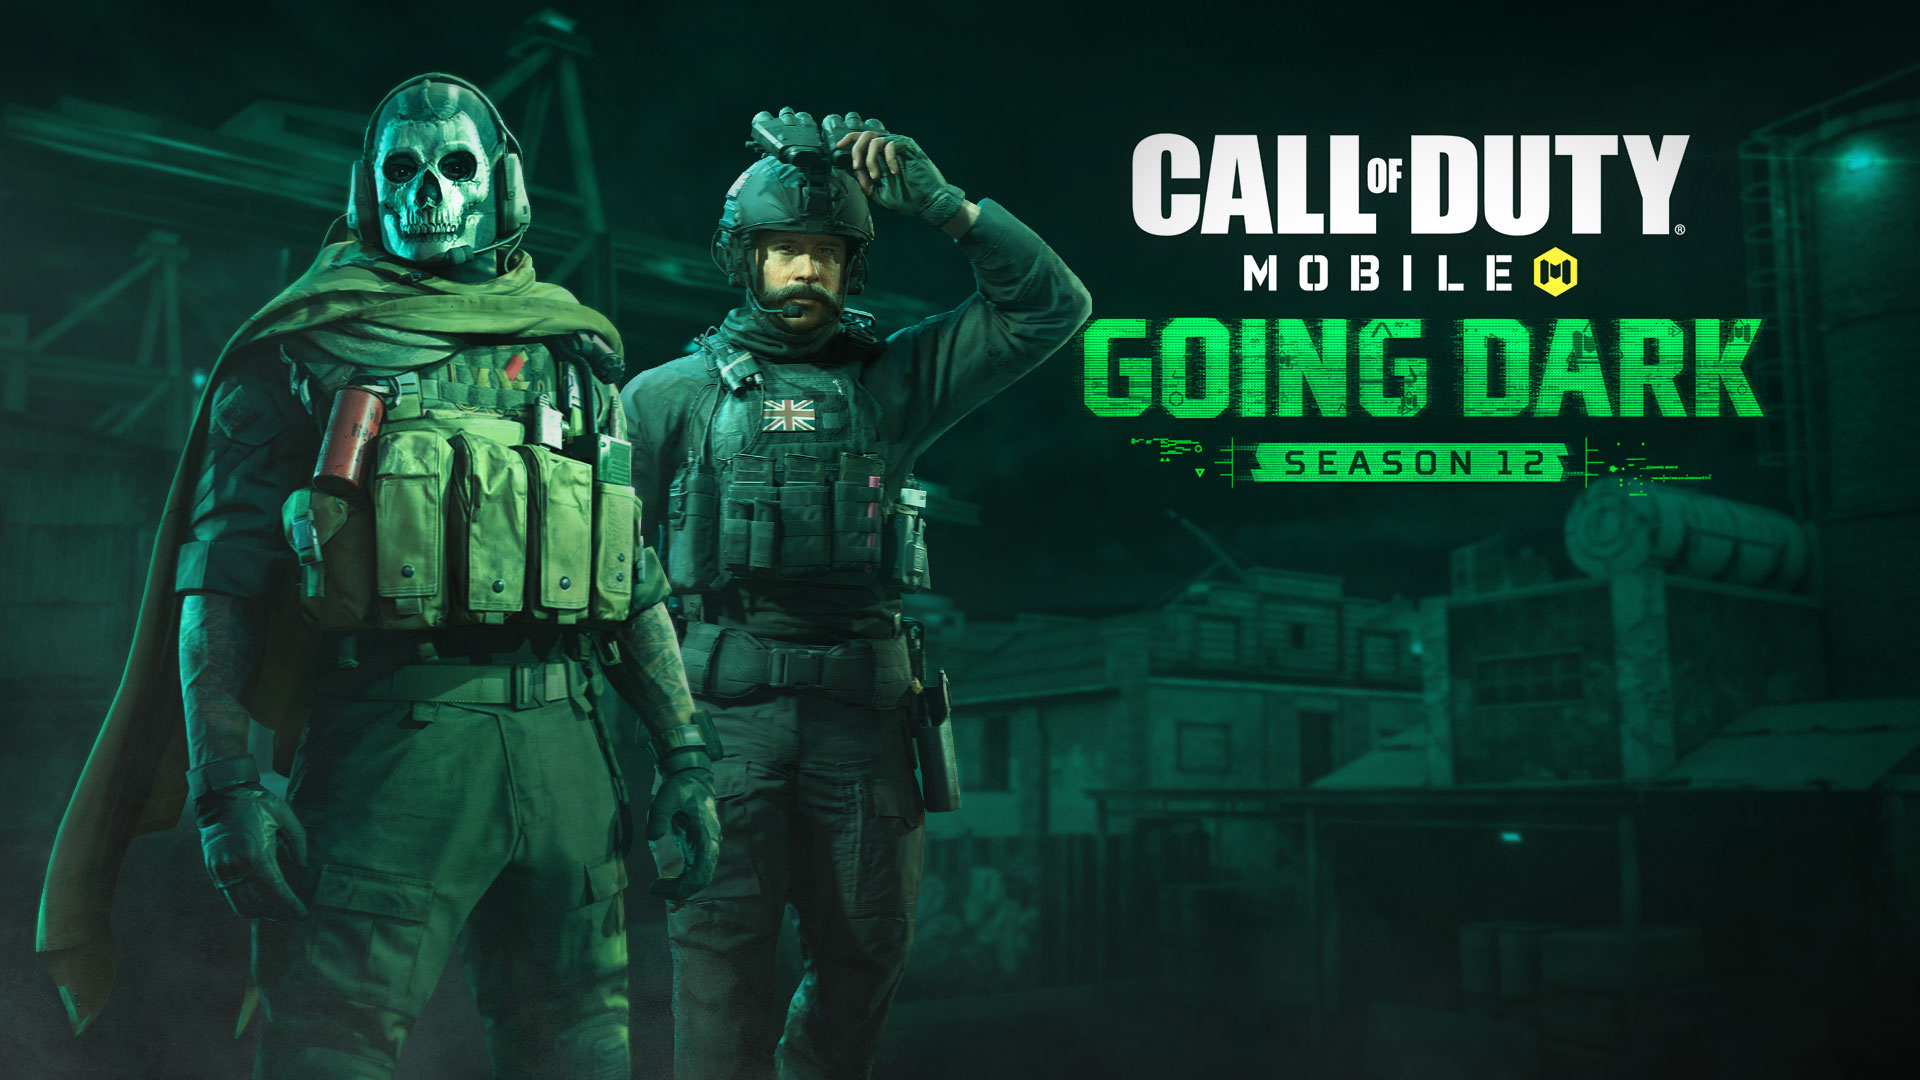 Night Descends On Call Of Duty Mobile In Going Dark The Latest Season Launching November 11